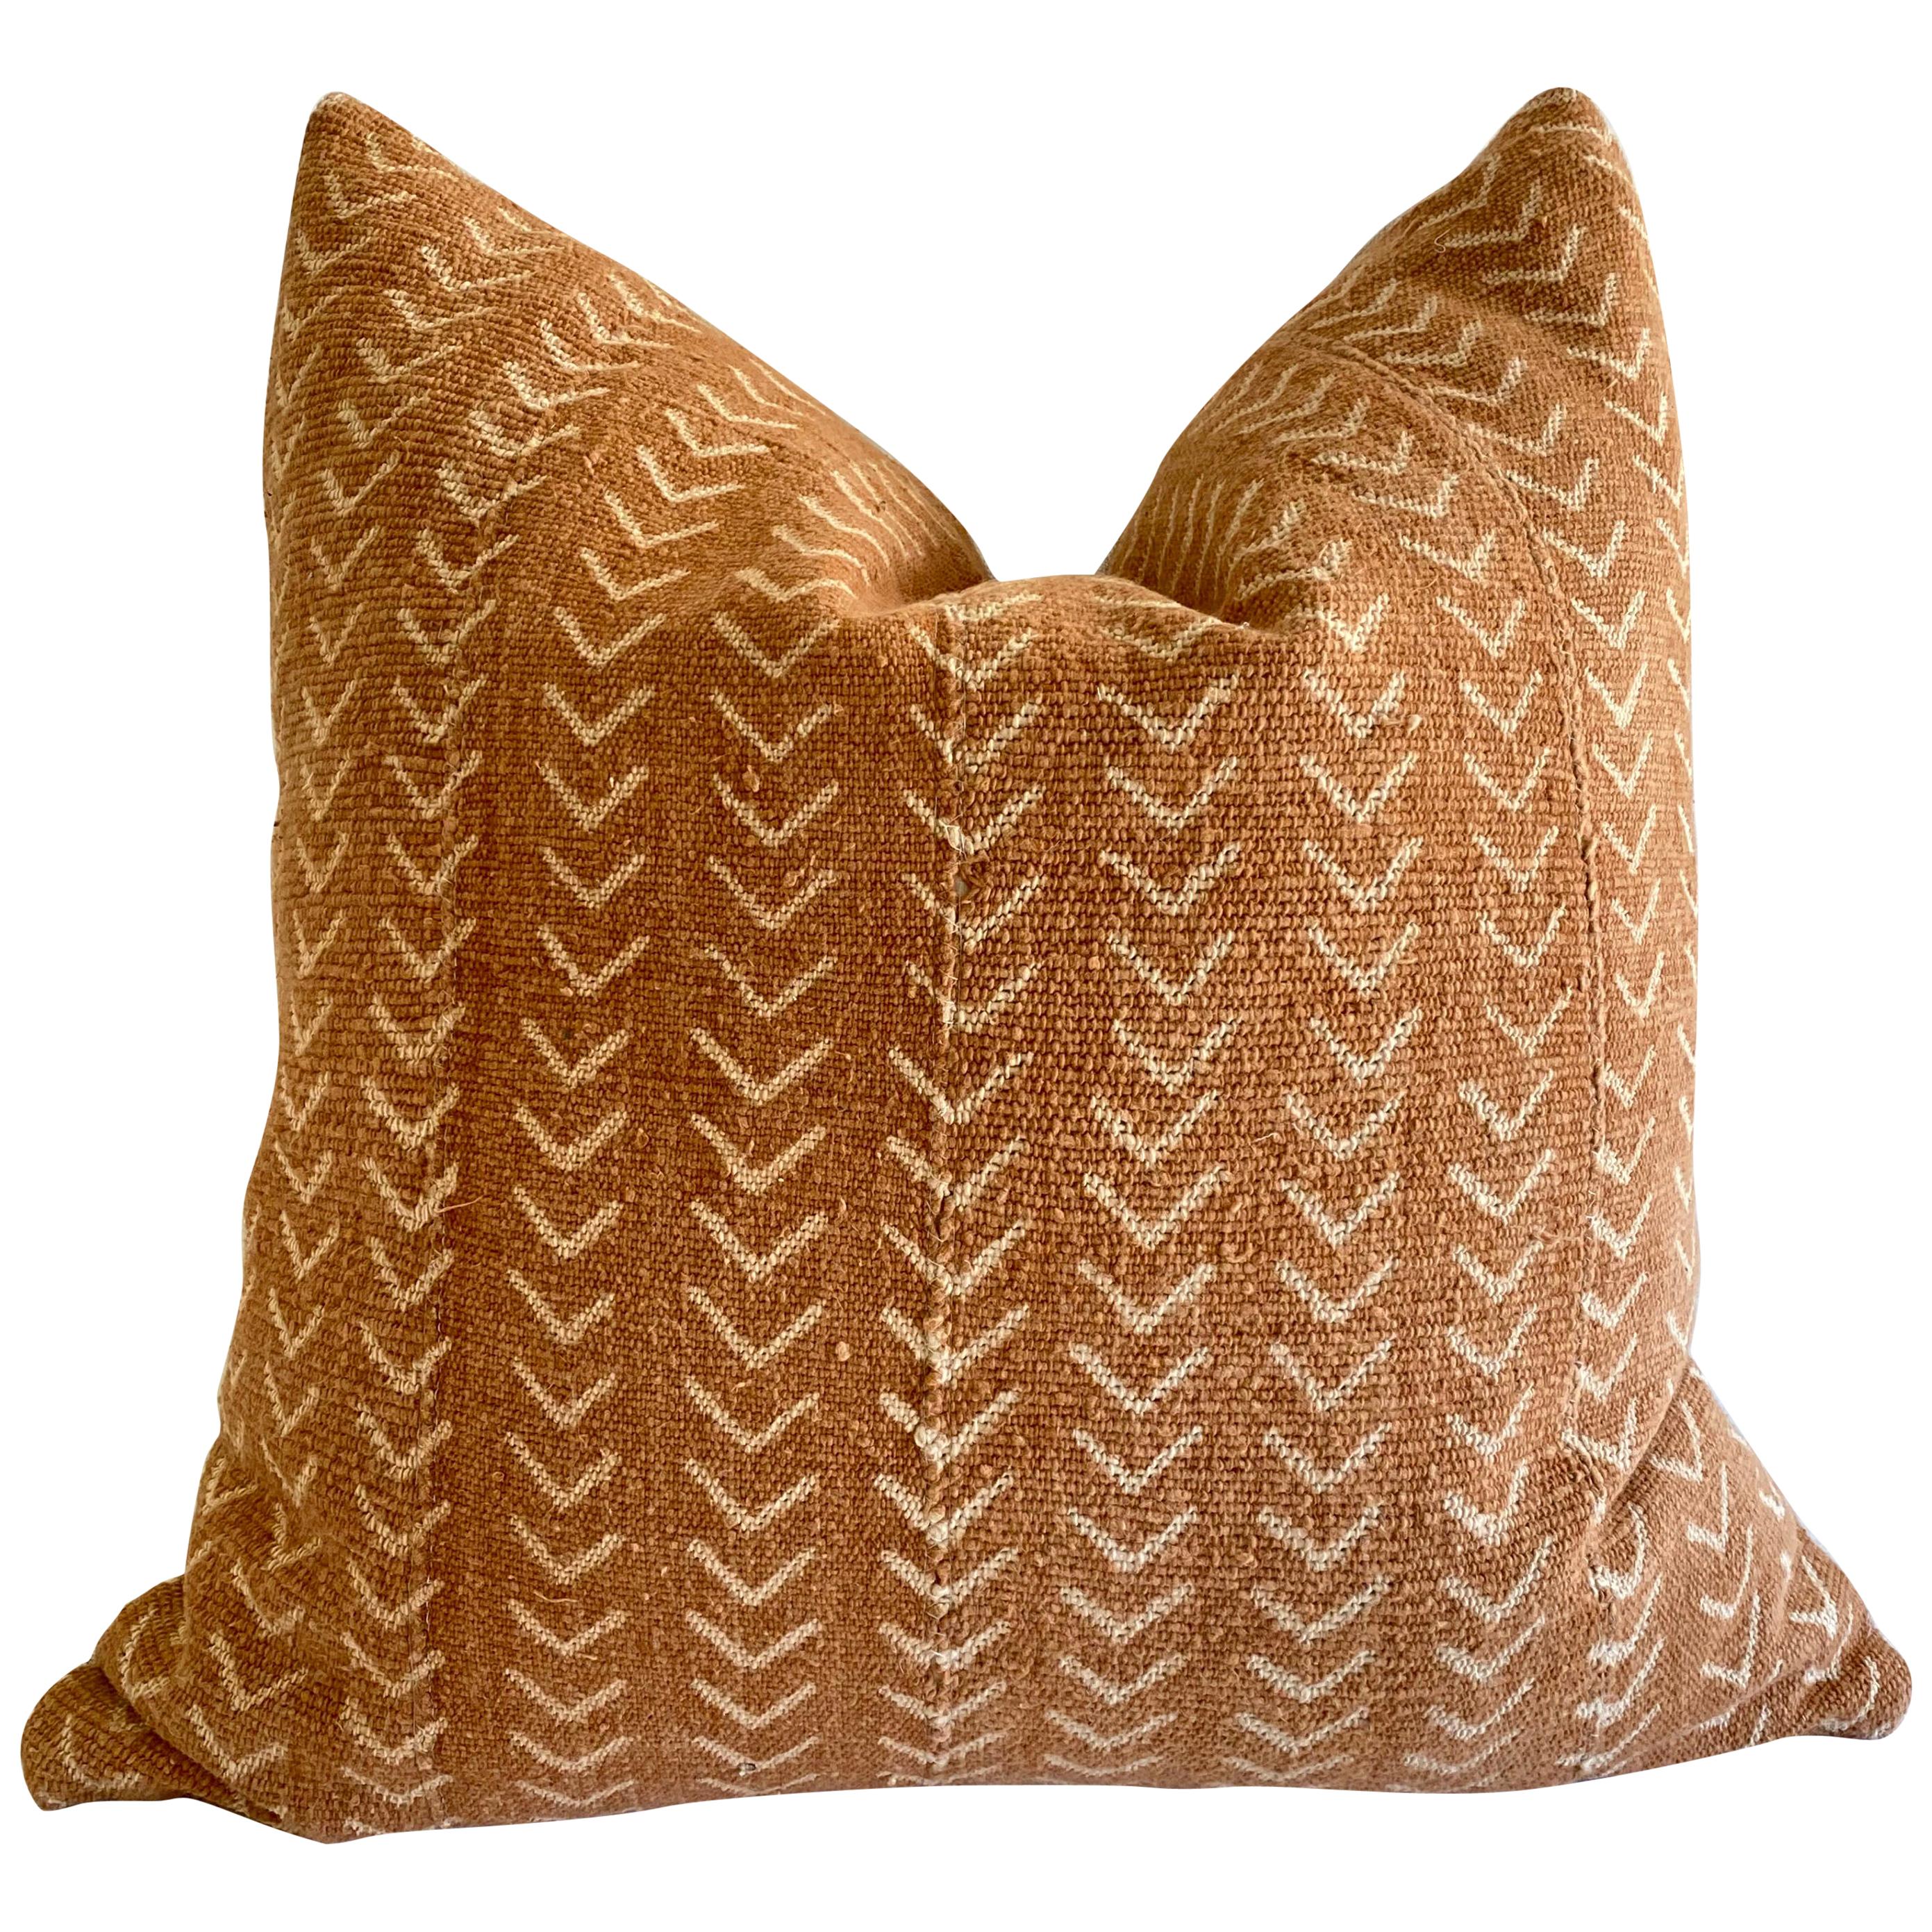 Vintage Custom Mali Mudcloth Pillow with Down Insert